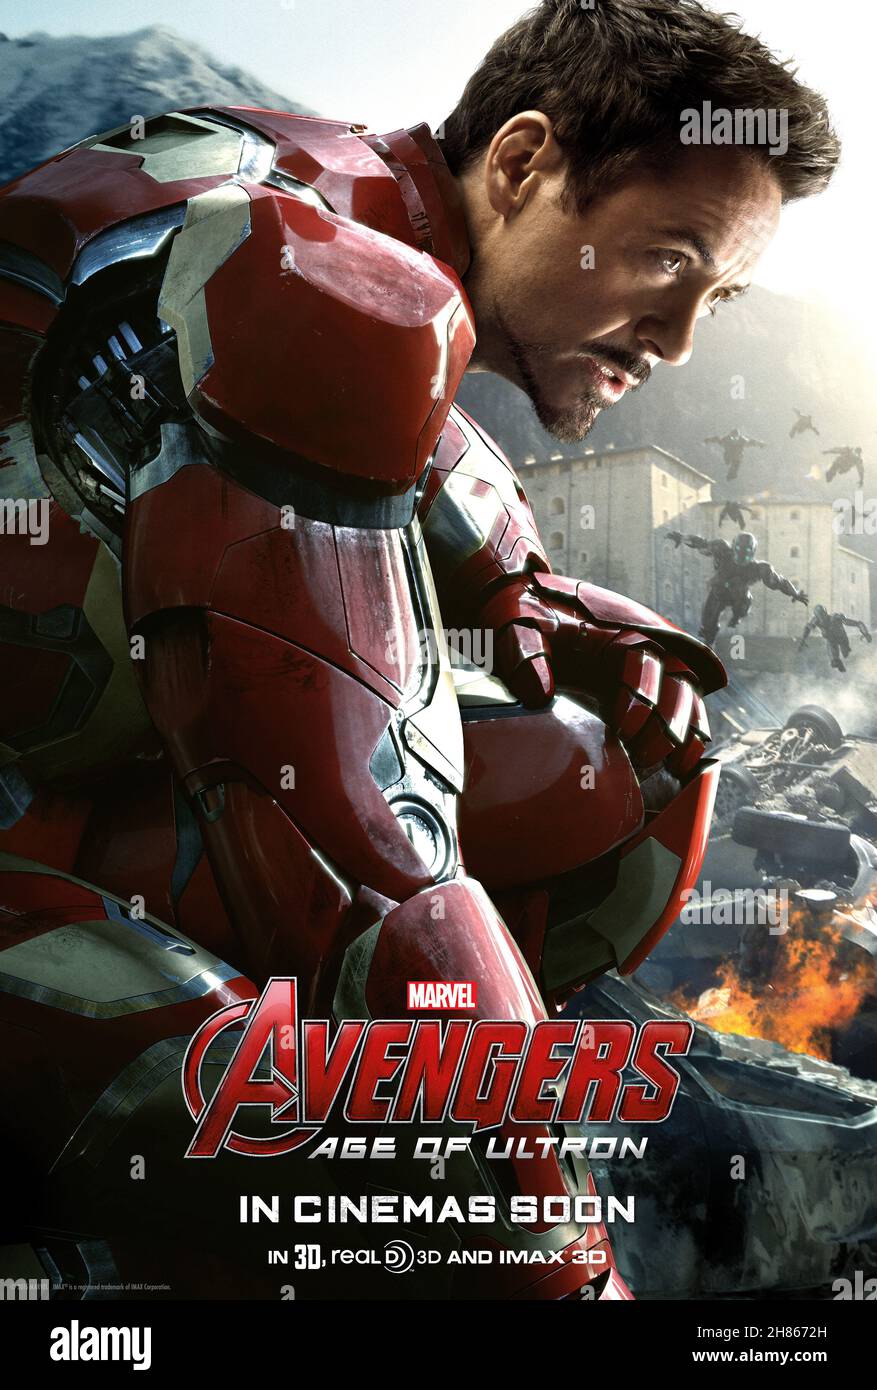 RELEASE DATE: May 1, 2015. TITLE: Avengers: Age of Ultron STUDIO: Marvel Studios.DIRECTOR: Joss Whedon. PLOT: When Tony Stark tries to jumpstart a dormant peacekeeping program, things go awry and it is up to the Avengers to stop the villainous Ultron from enacting his terrible plans. PICTURED: (Cobie Smulders), Steve Rogers/Captain America (Chris Evans), James Rhodes/War Machine (Don Cheadle), Dr. Cho (Claudia Kim), Thor (Chris Hemsworth), Tony Stark/Iron Man (Robert Downey Jr.), Clint Barton/Hawkeye (Jeremy Renner), Bruce Banner/Hulk (Mark Ruffalo), and Natasha Romanoff/Black Widow (Scarlett Stock Photo